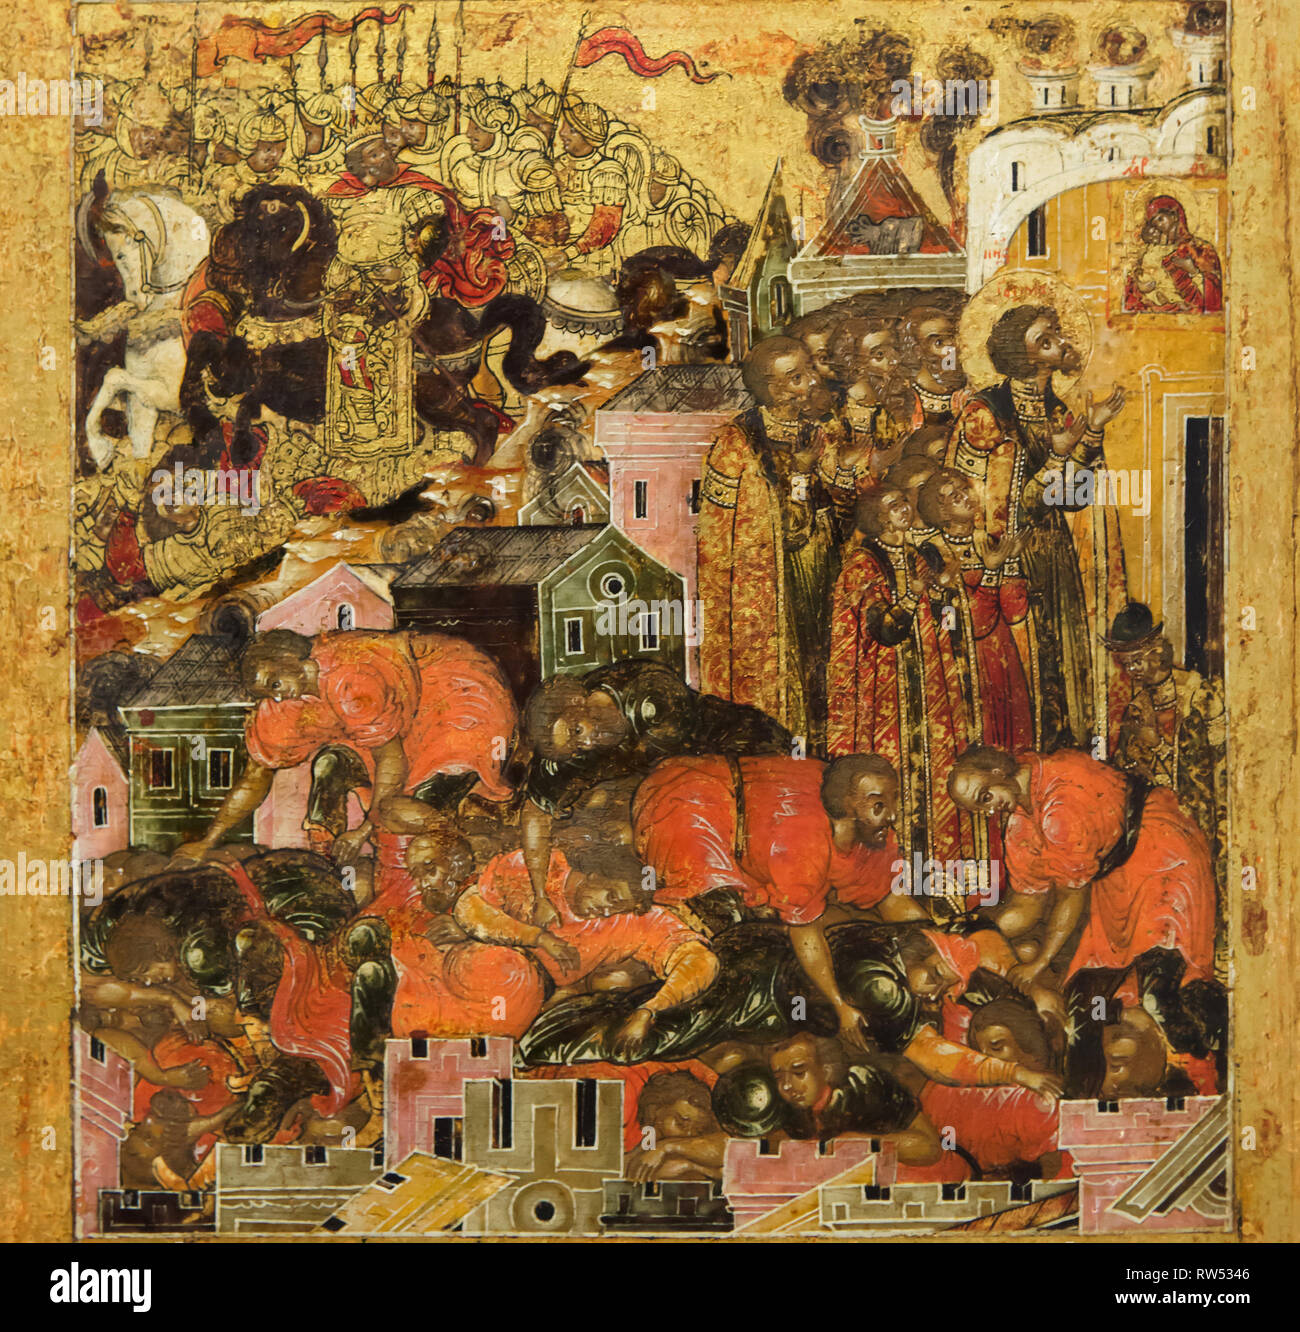 Destruction of the city of Vladimir by the Tatars in February 1238. Detail of the Russian icon of Our Lady of Vladimir of the Yaroslavl icon painting school dated from the middle of the 17th century from the Church of Saint John Chrysostom in Korovniky in Yaroslavl, now on display in the Yaroslavl Museum Preserve in Yaroslavl, Russia. Stock Photo